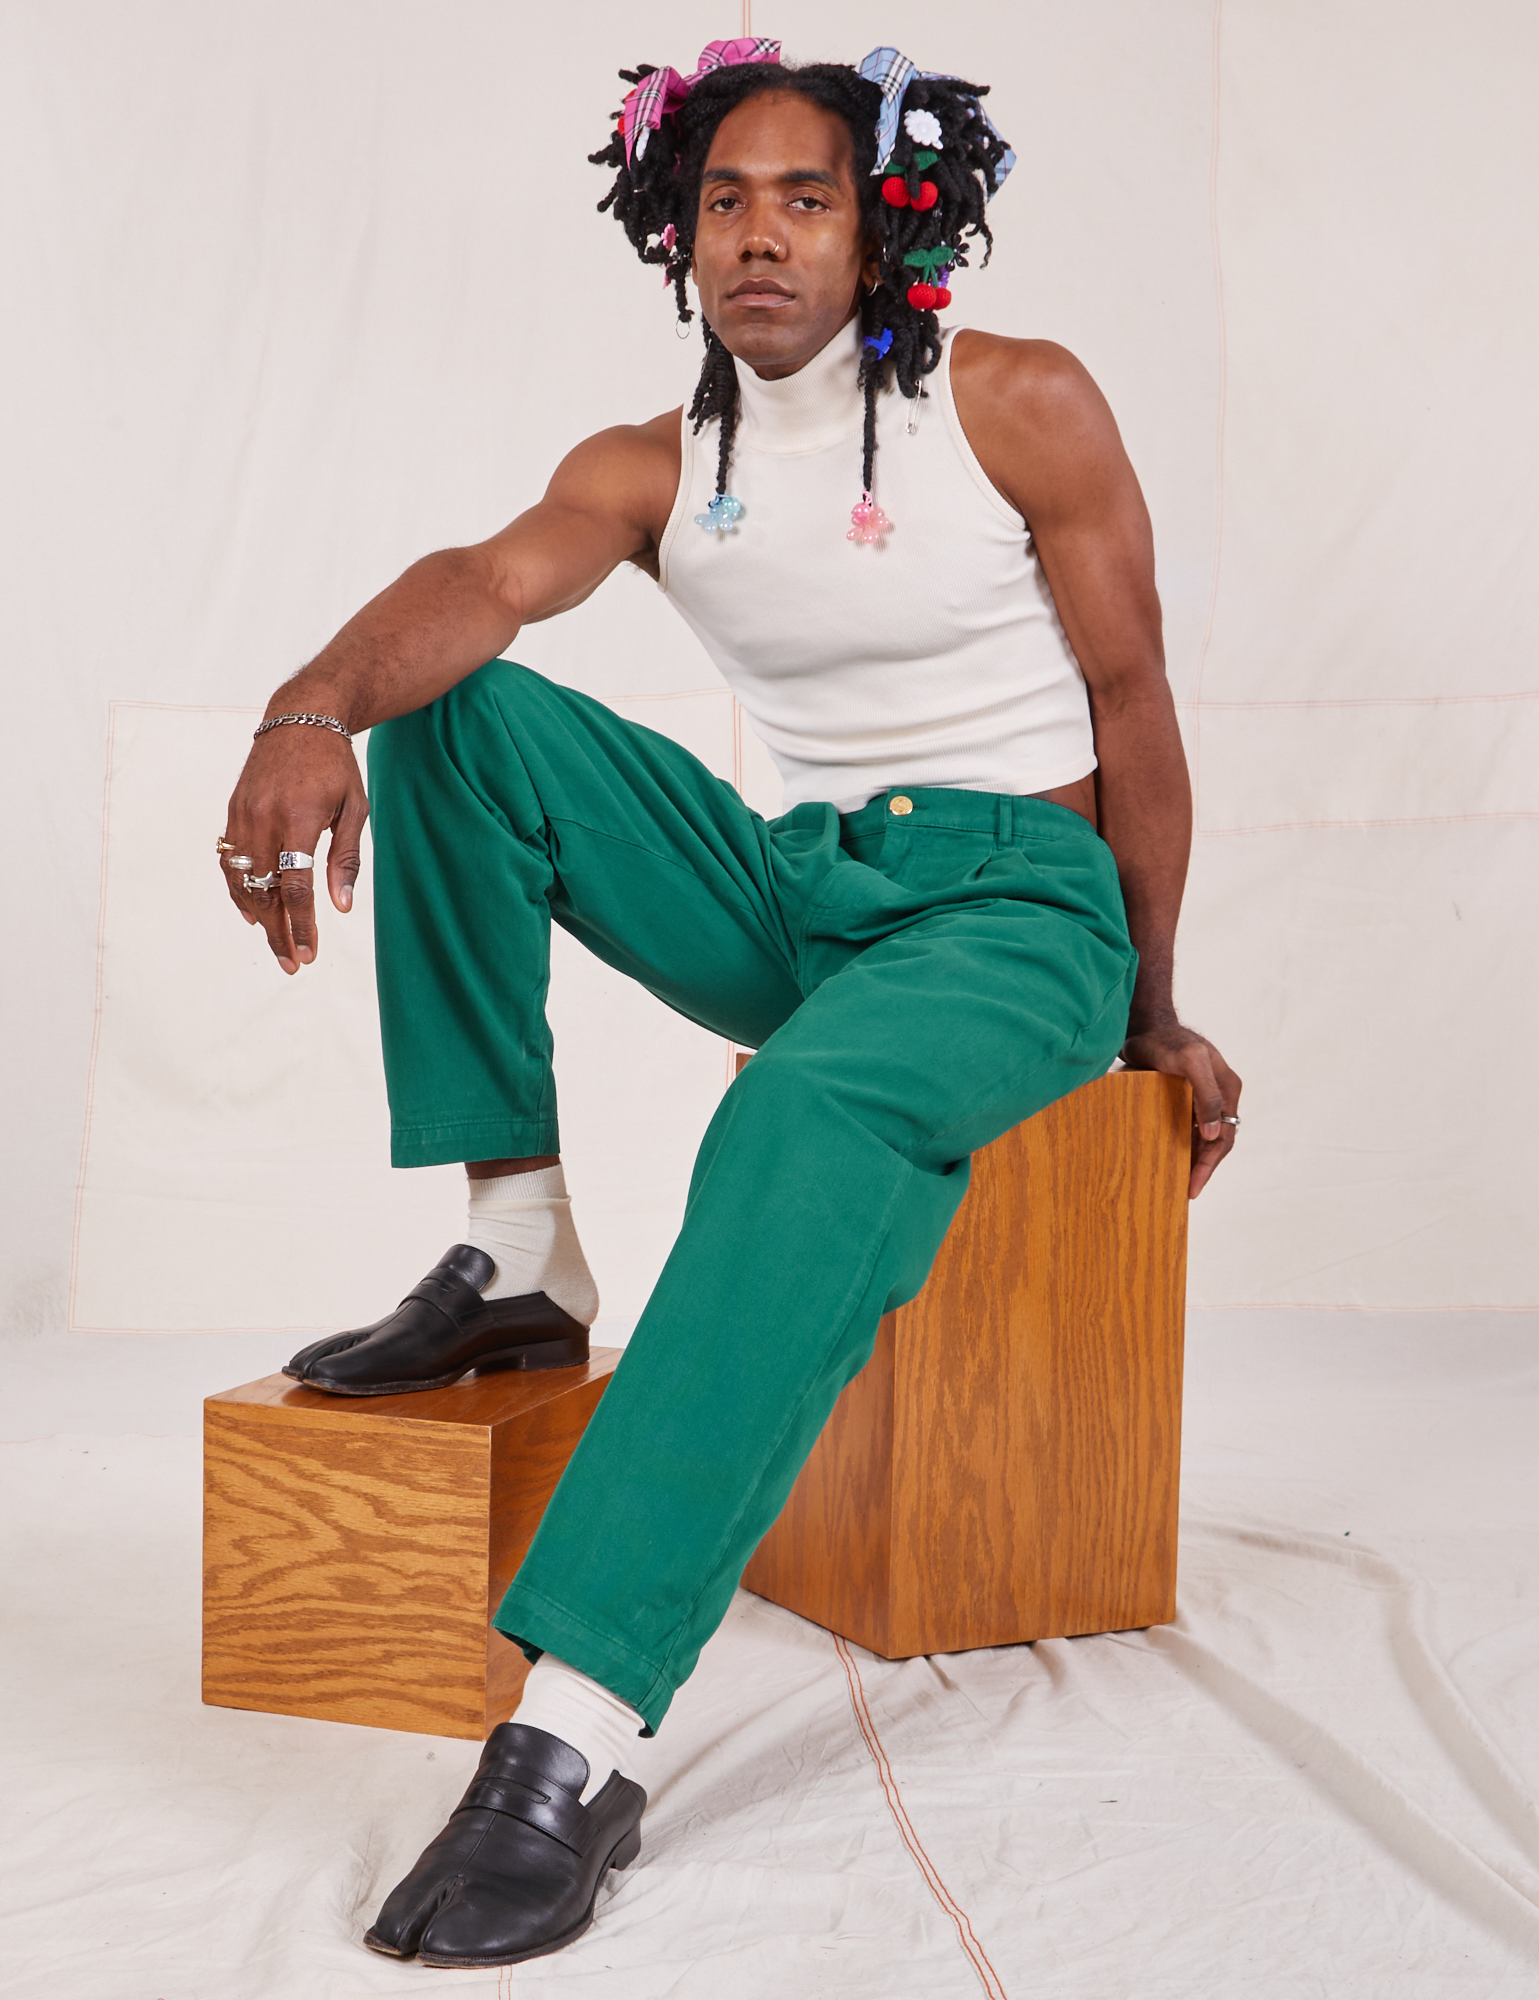 Jerrod is wearing Heavyweight Trousers in Hunter Green and Sleeveless Turtleneck in vintage tee off-white